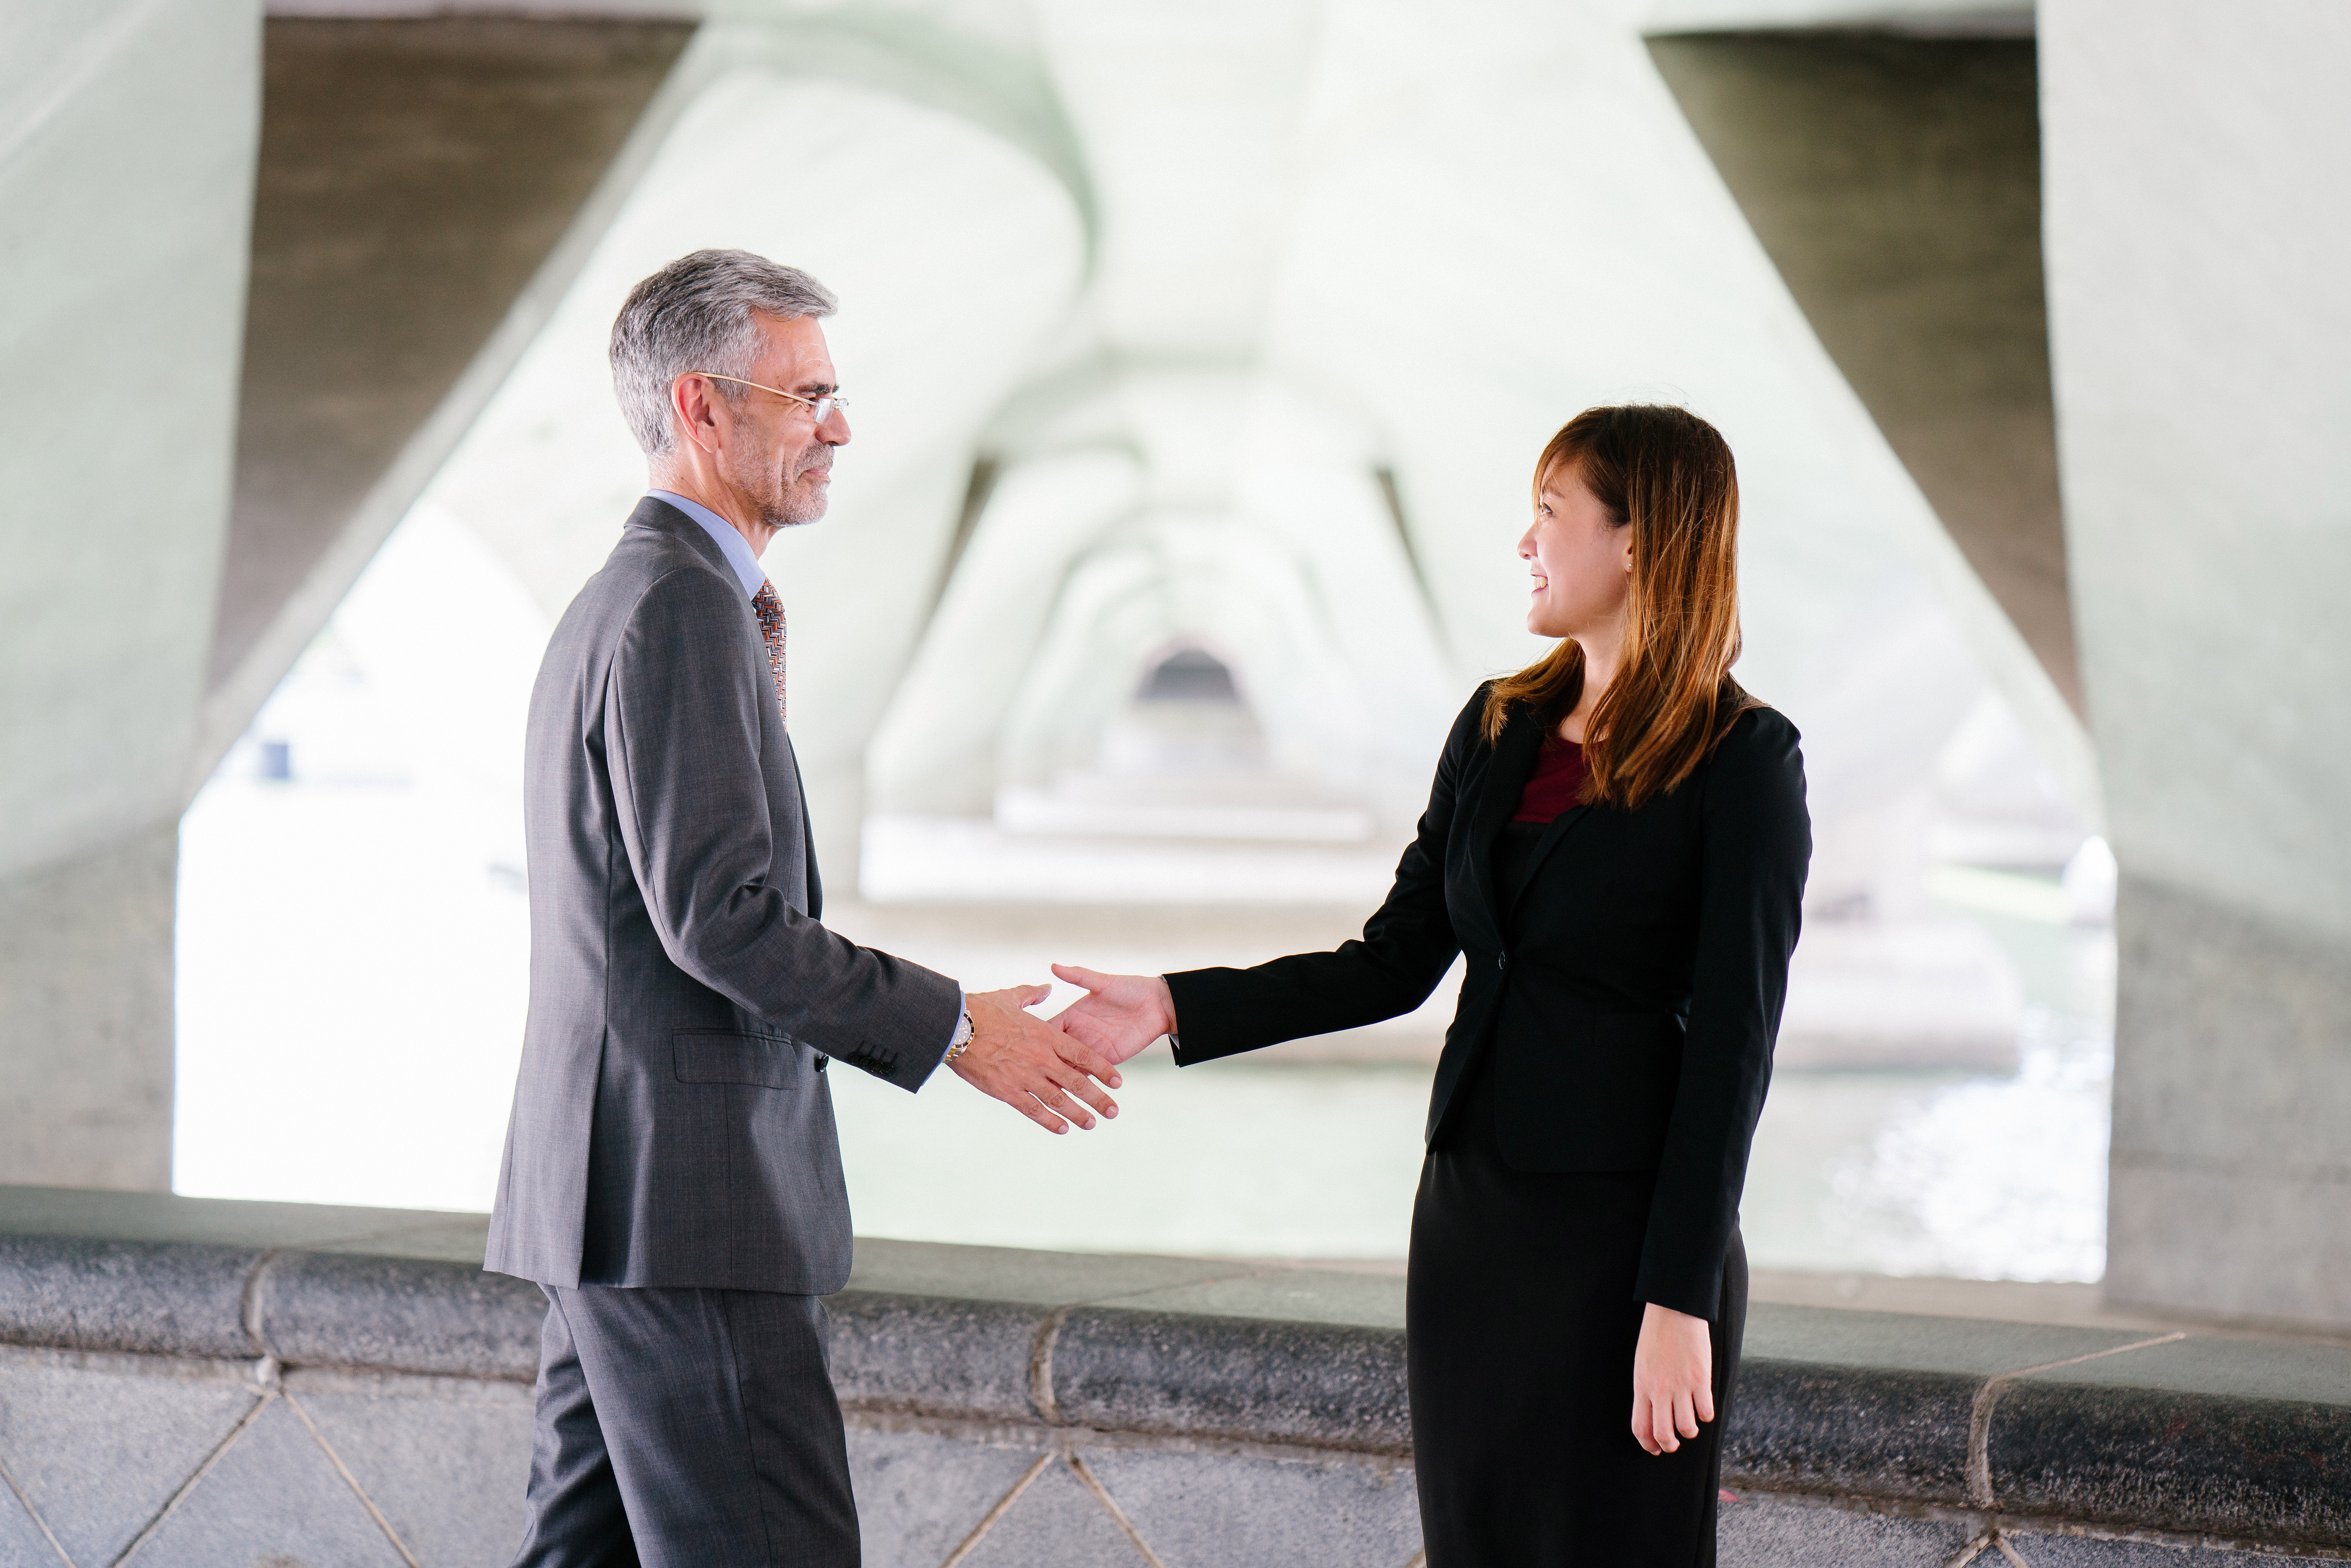 prospective employer shakes the hand of an employee after an interview